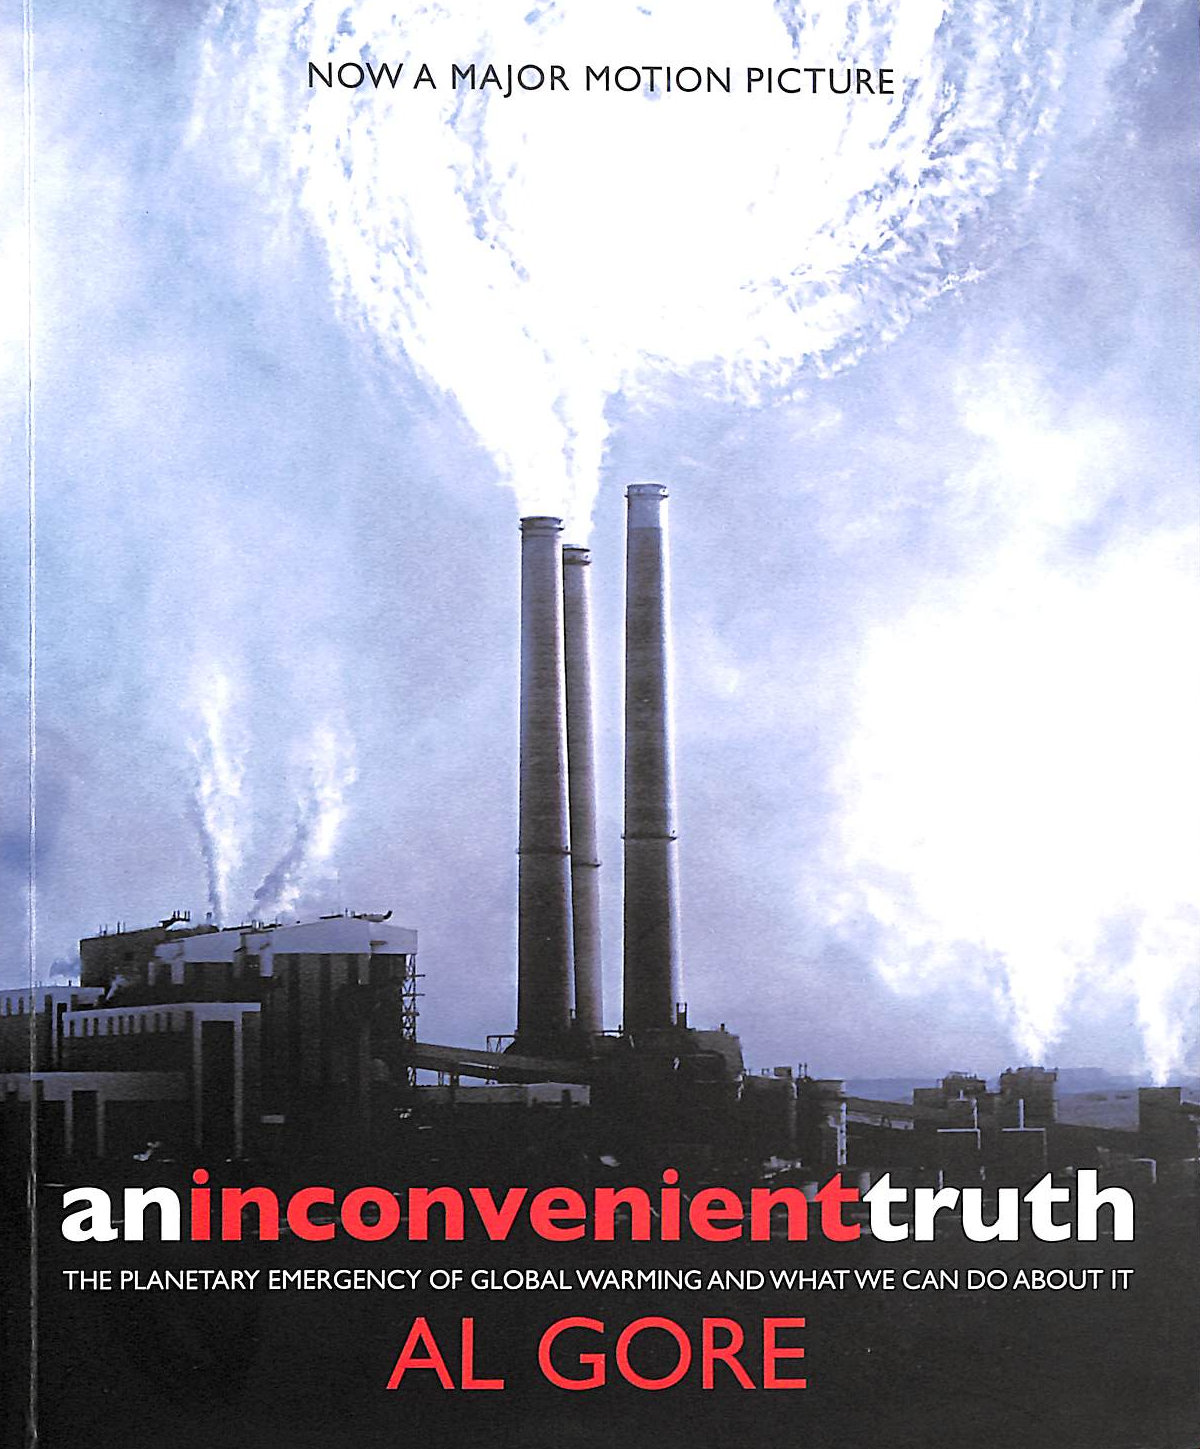 GORE, AL - An Inconvenient Truth: The Planetary Emergency of Global Warming and What We Can Do About it